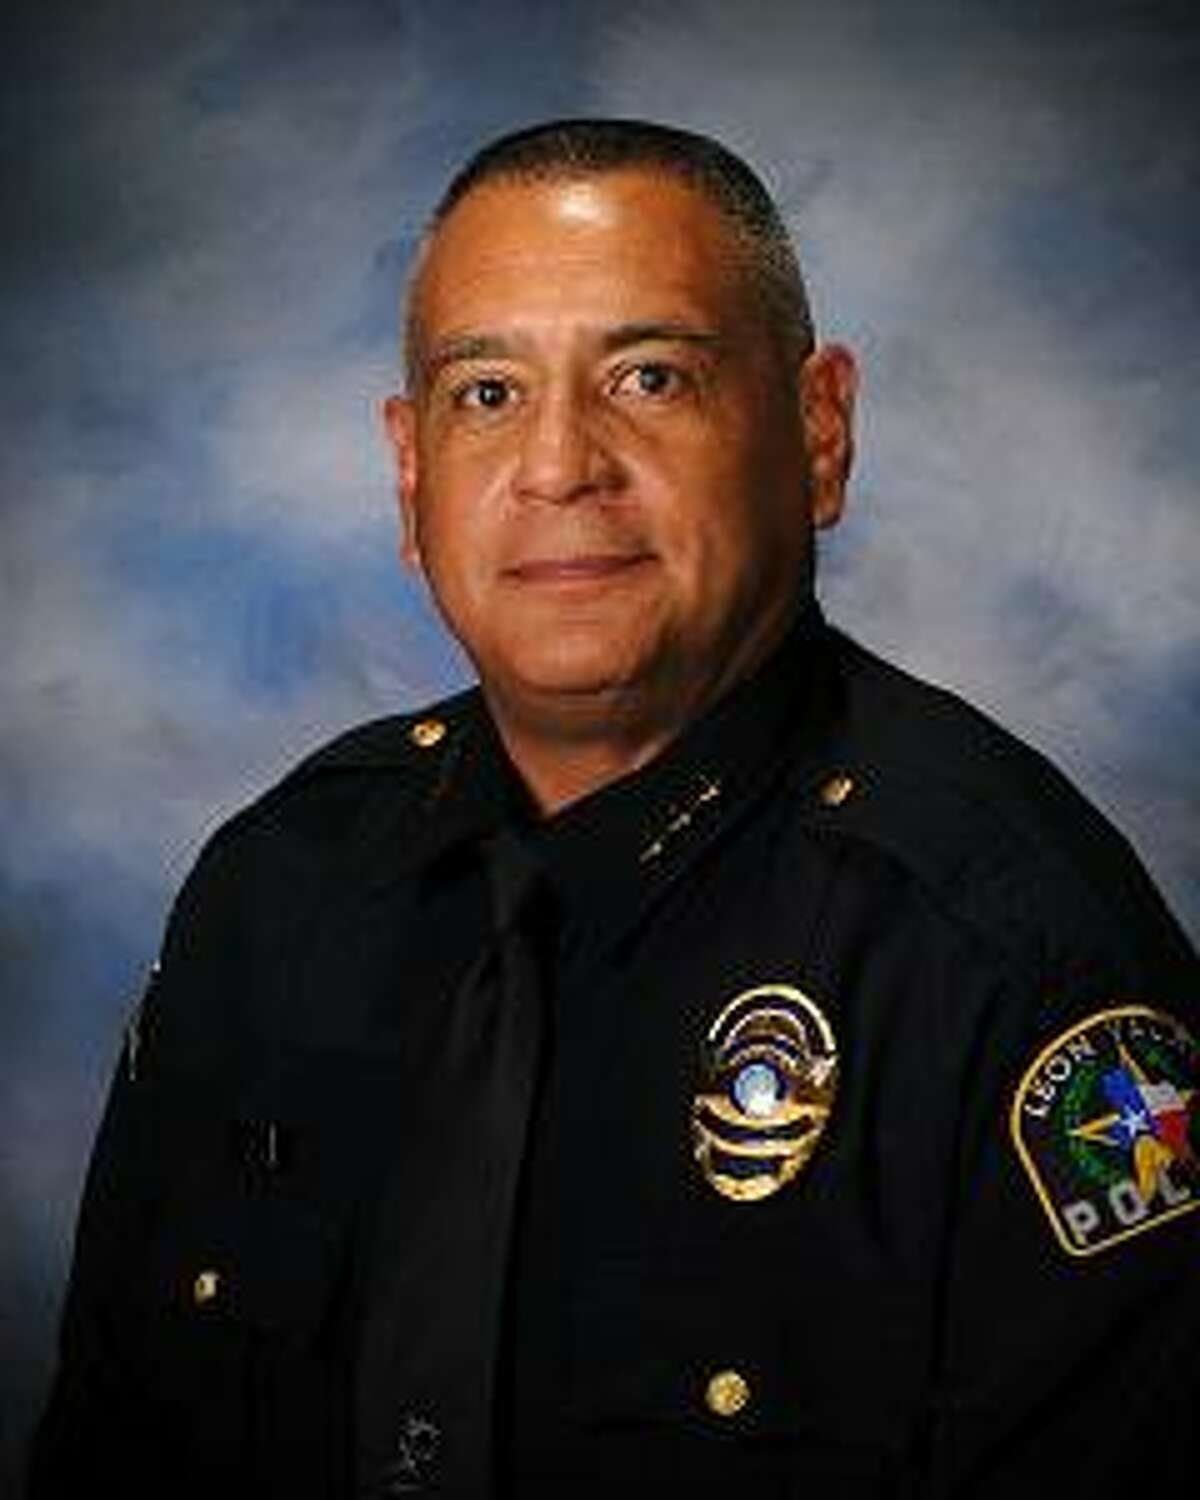 Ruben Saucedo, currently an assistant police chief in Leon Valley, will become the new Converse police chief on May 18.